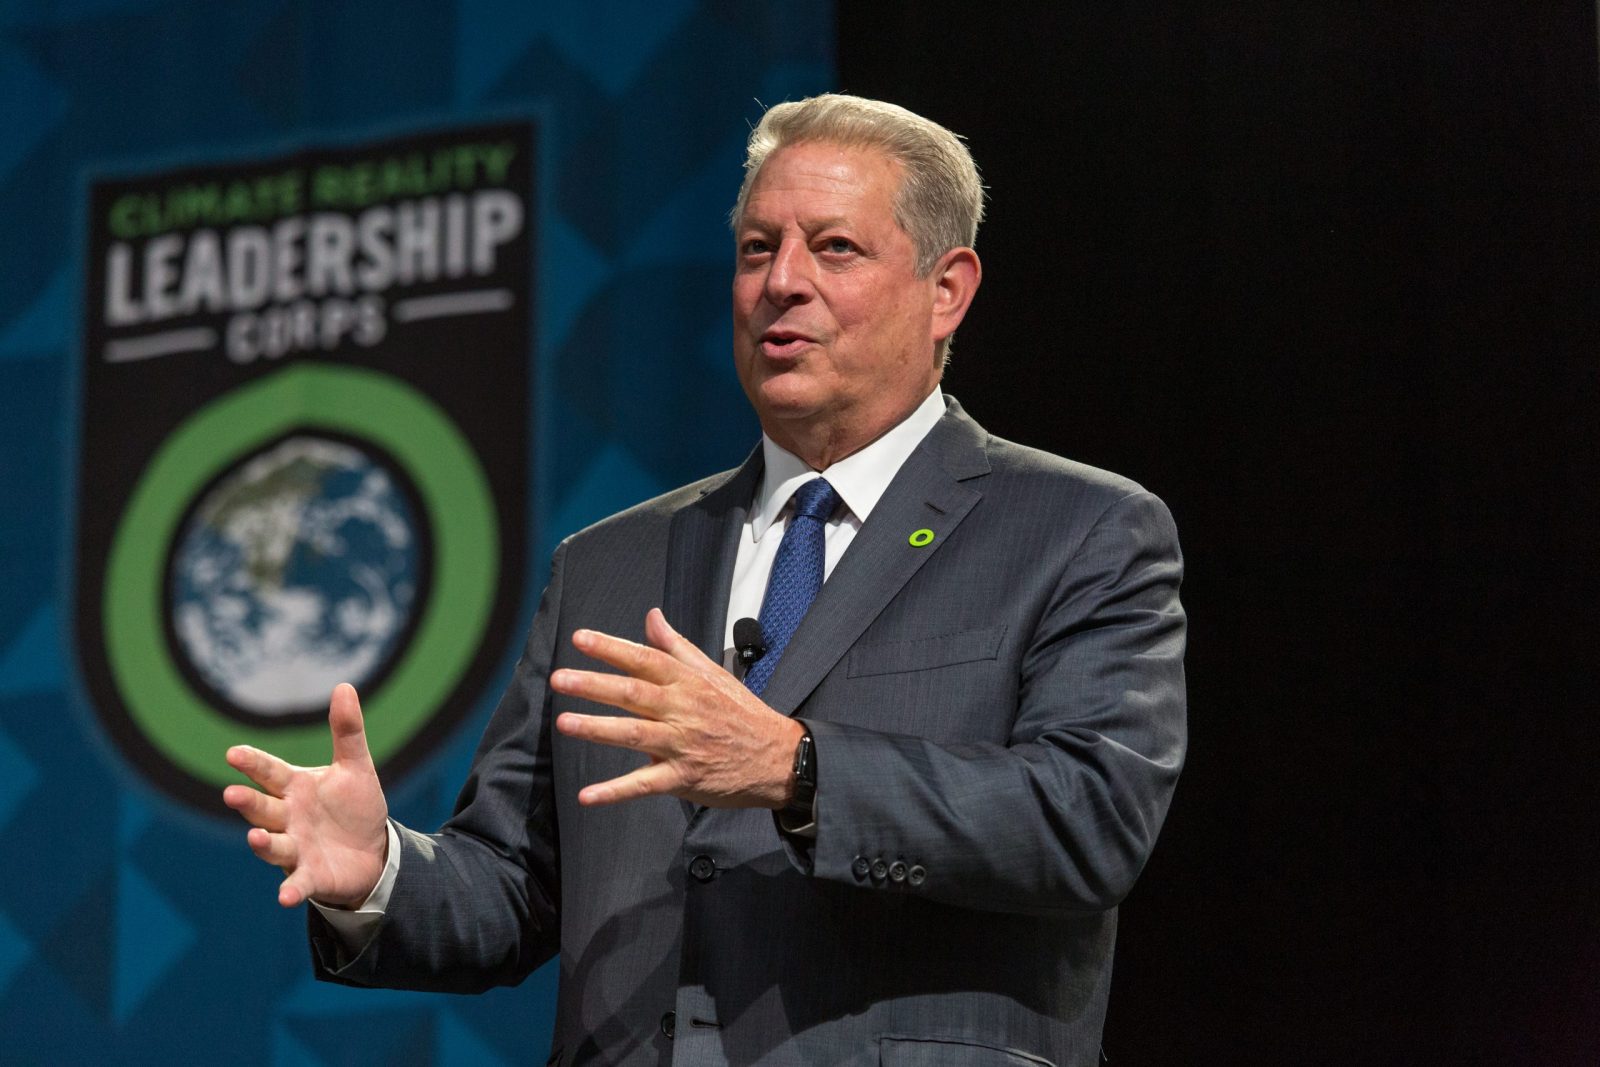 Al Gore speaking at conference